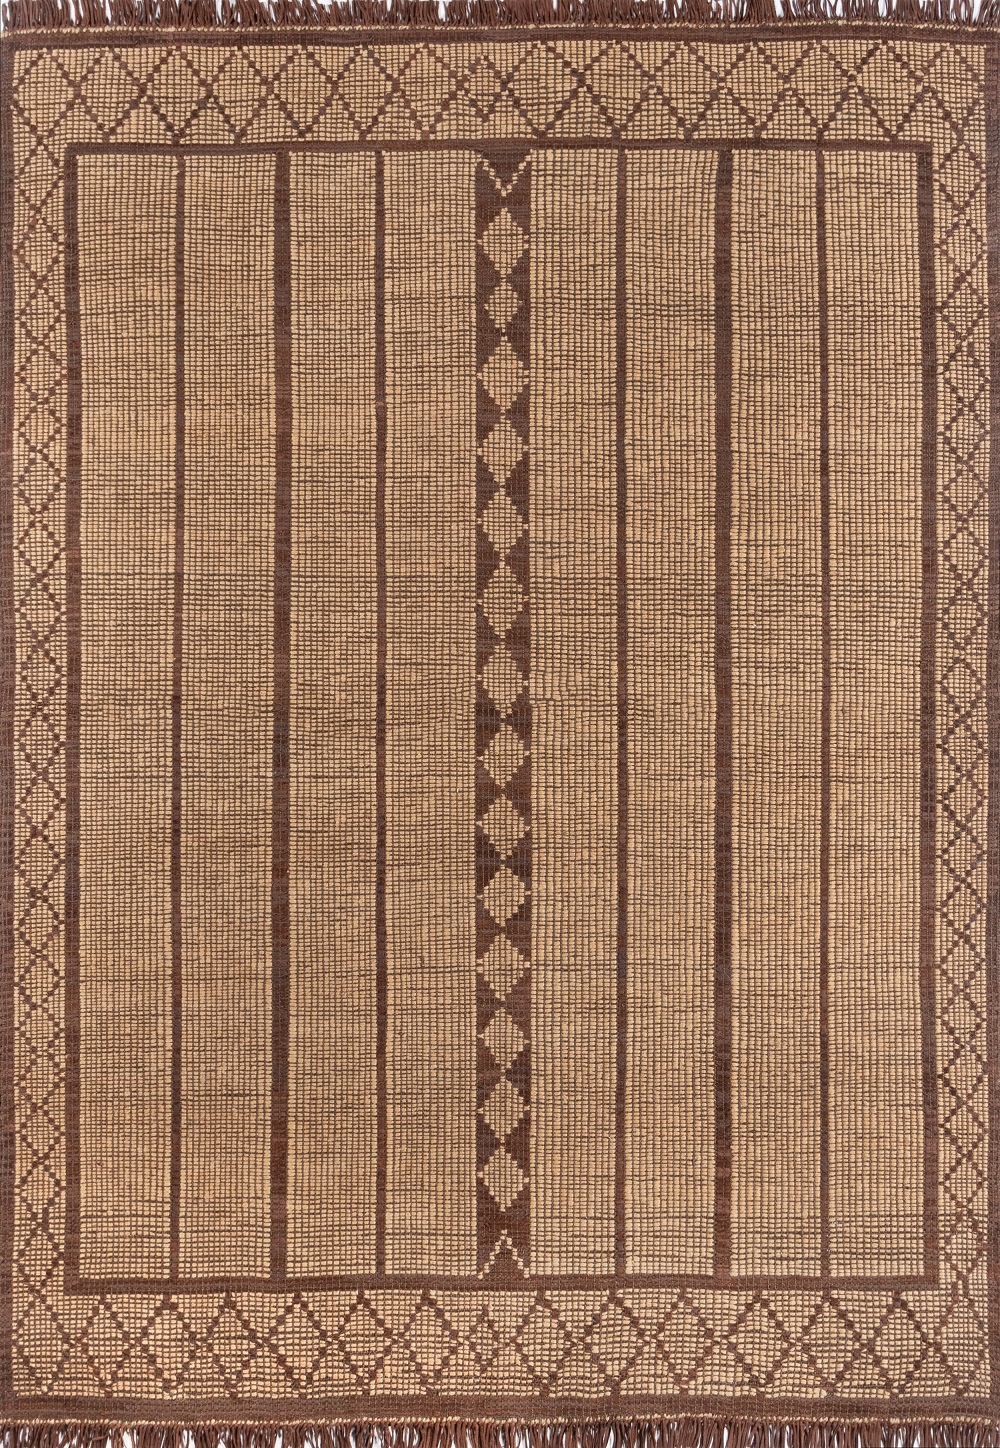 The Tugart Rug Collection